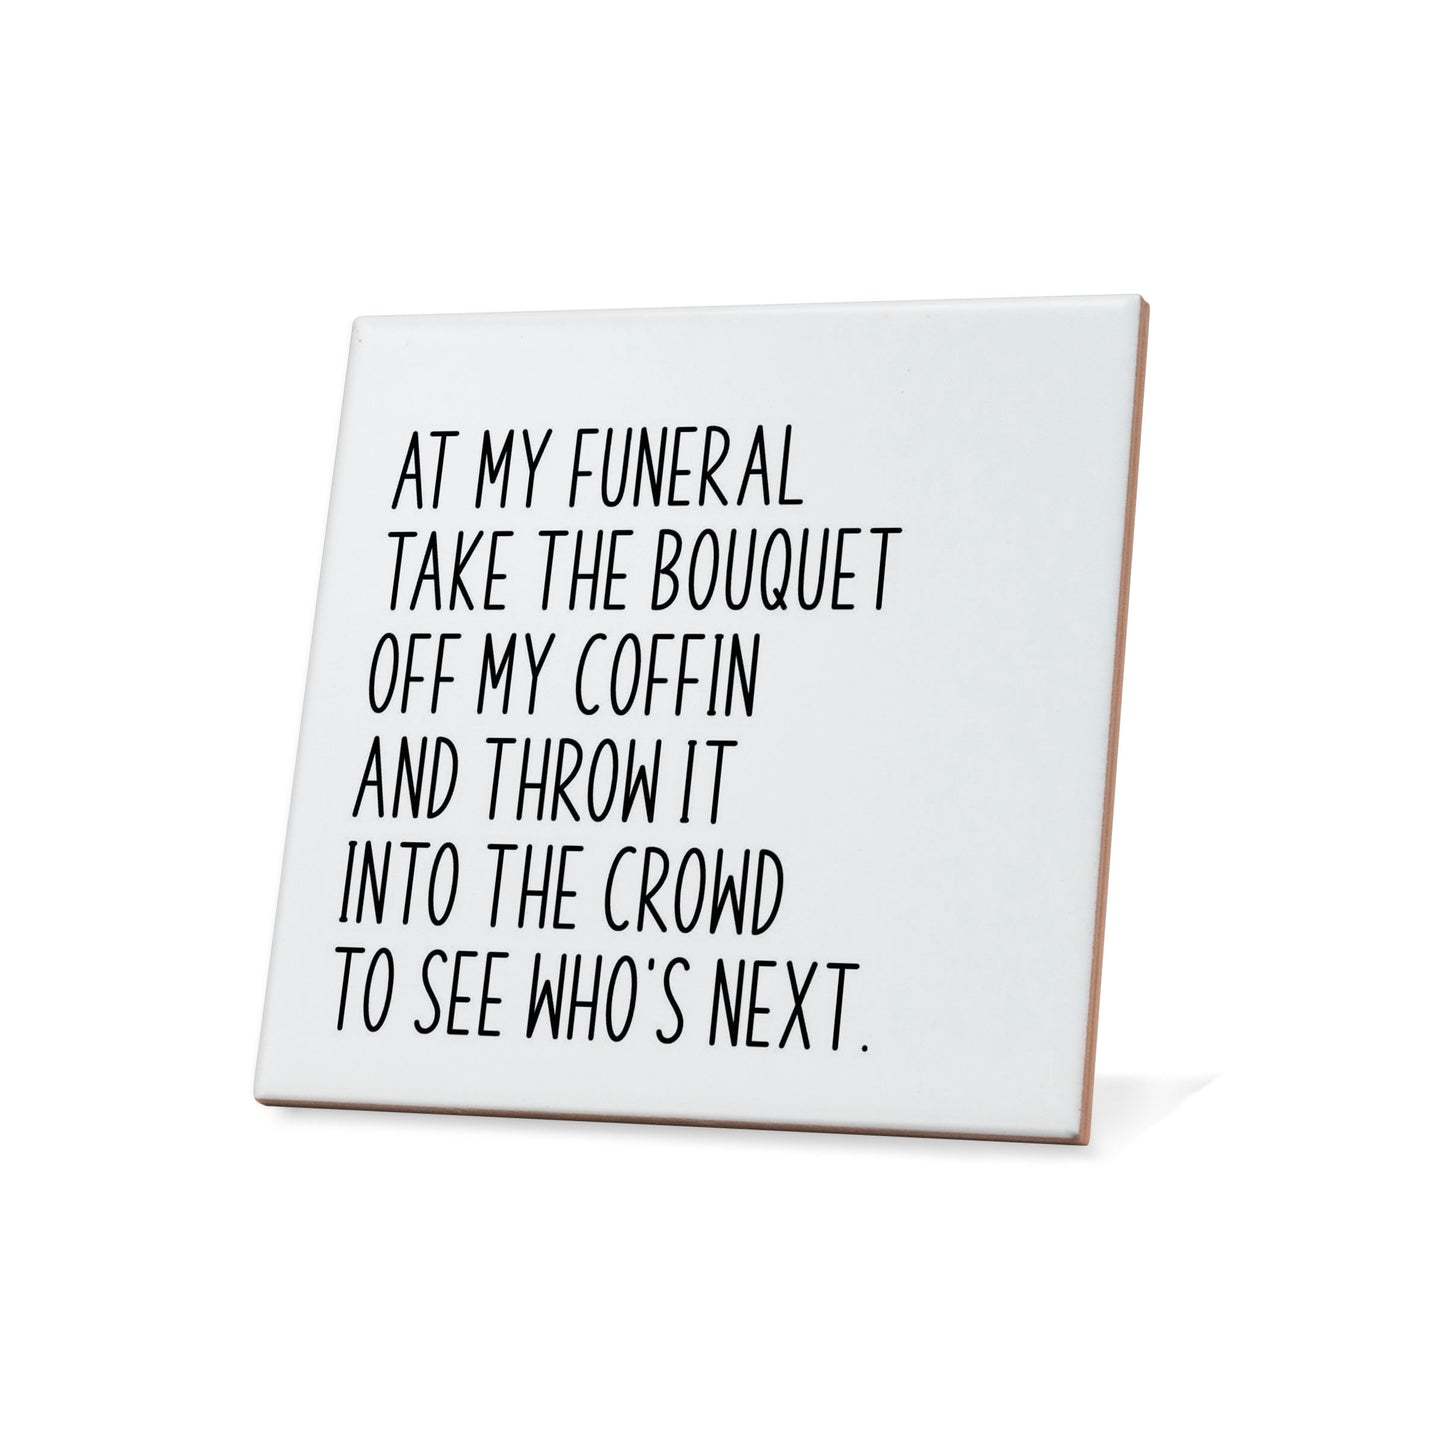 At my funeral take the bouquet..... Quote Coaster